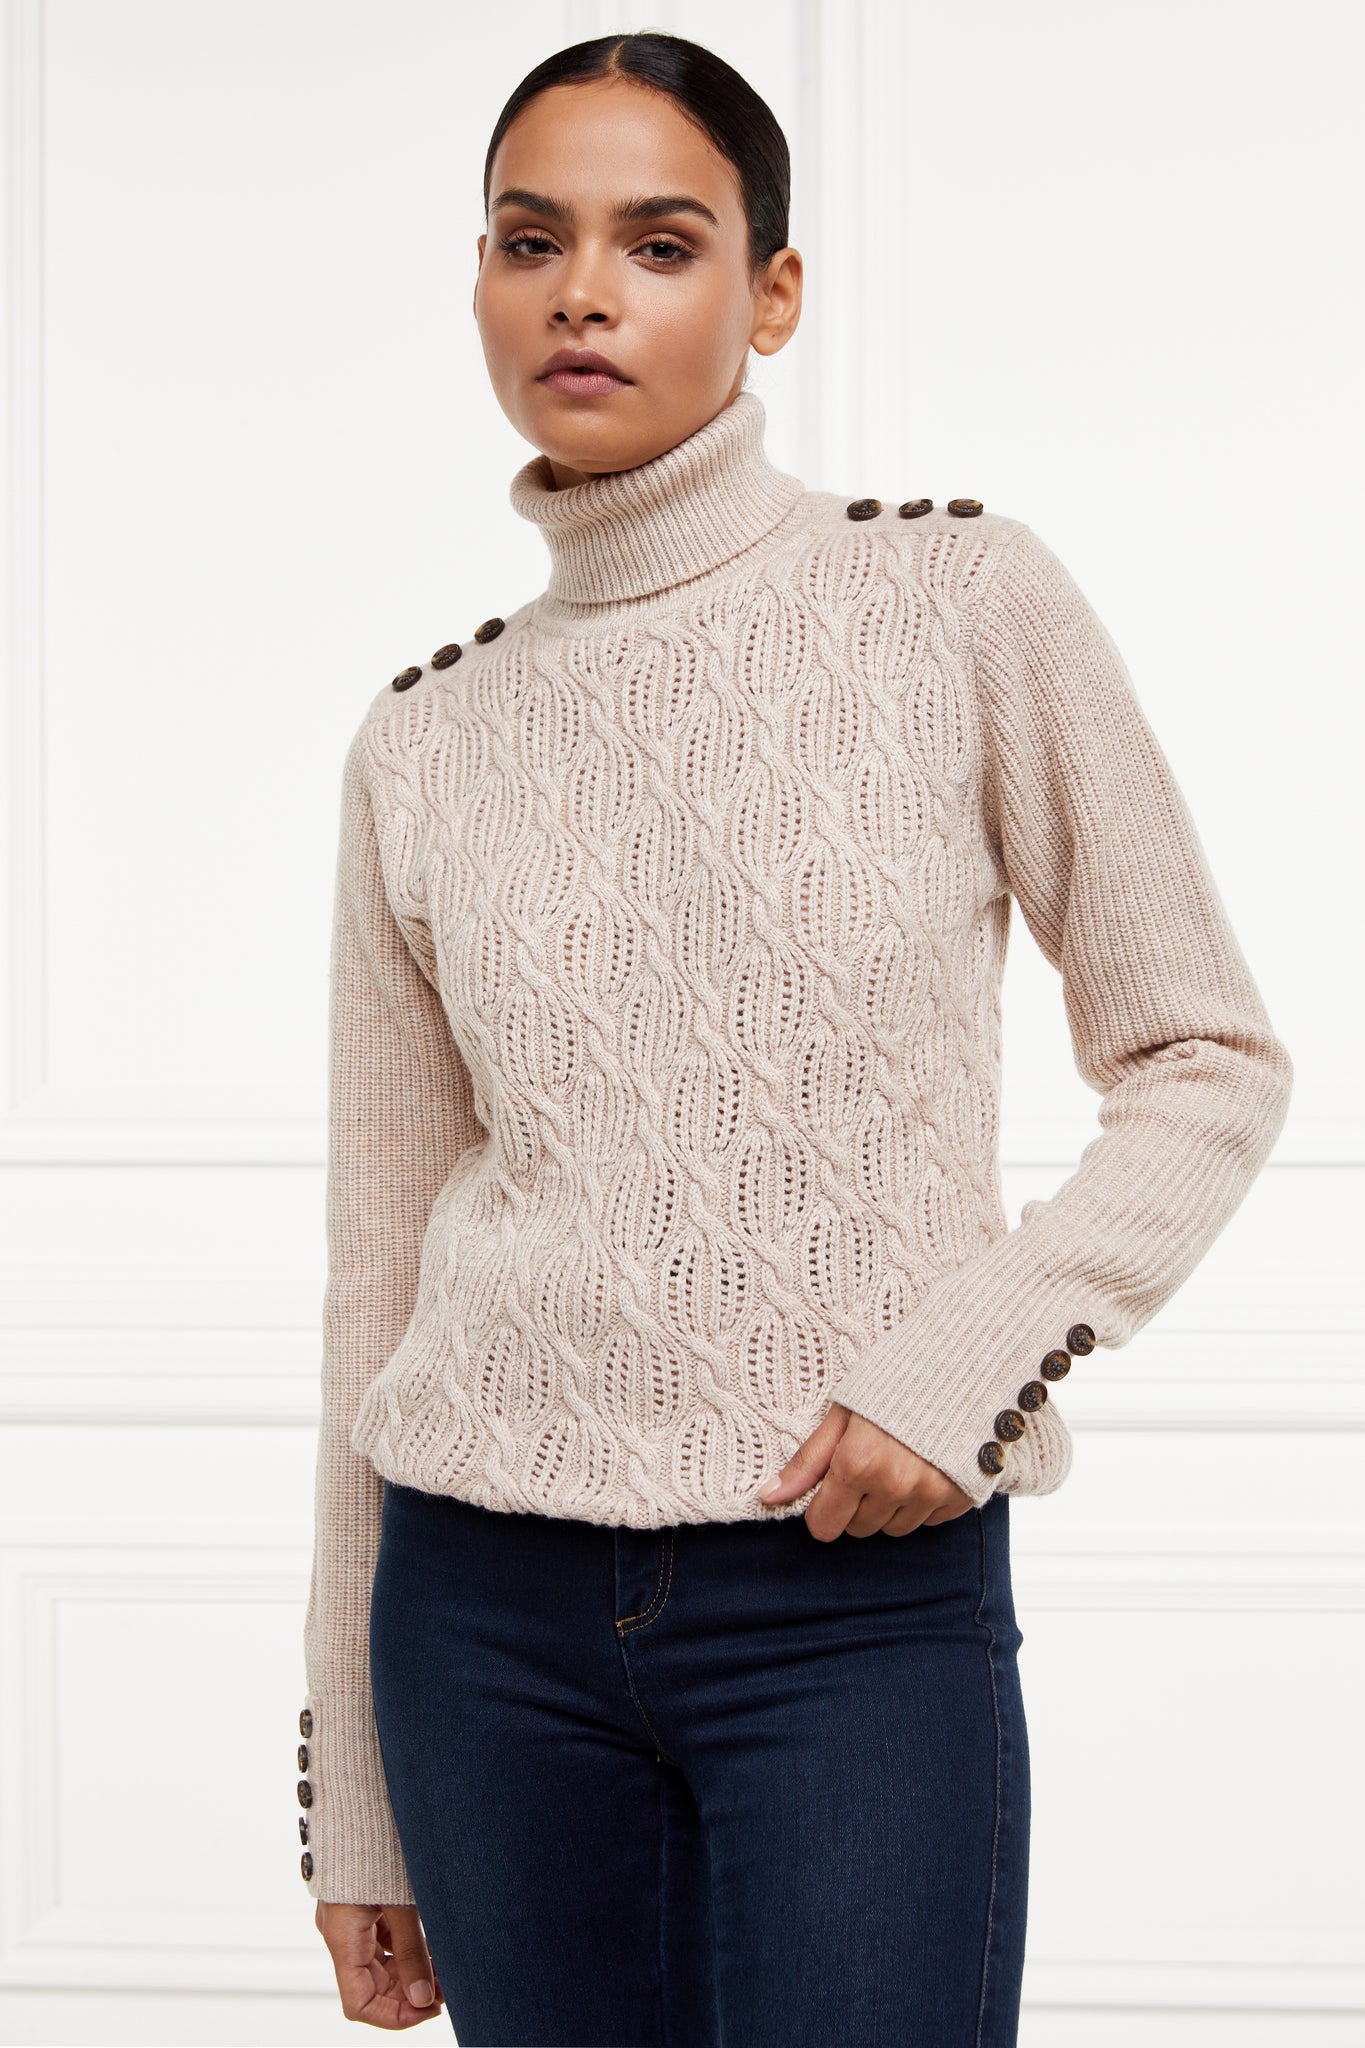 relaxed fit decorative cable knit merino wool roll neck jumper in oatmeal with horn buttons and ribbed cuffs and collar